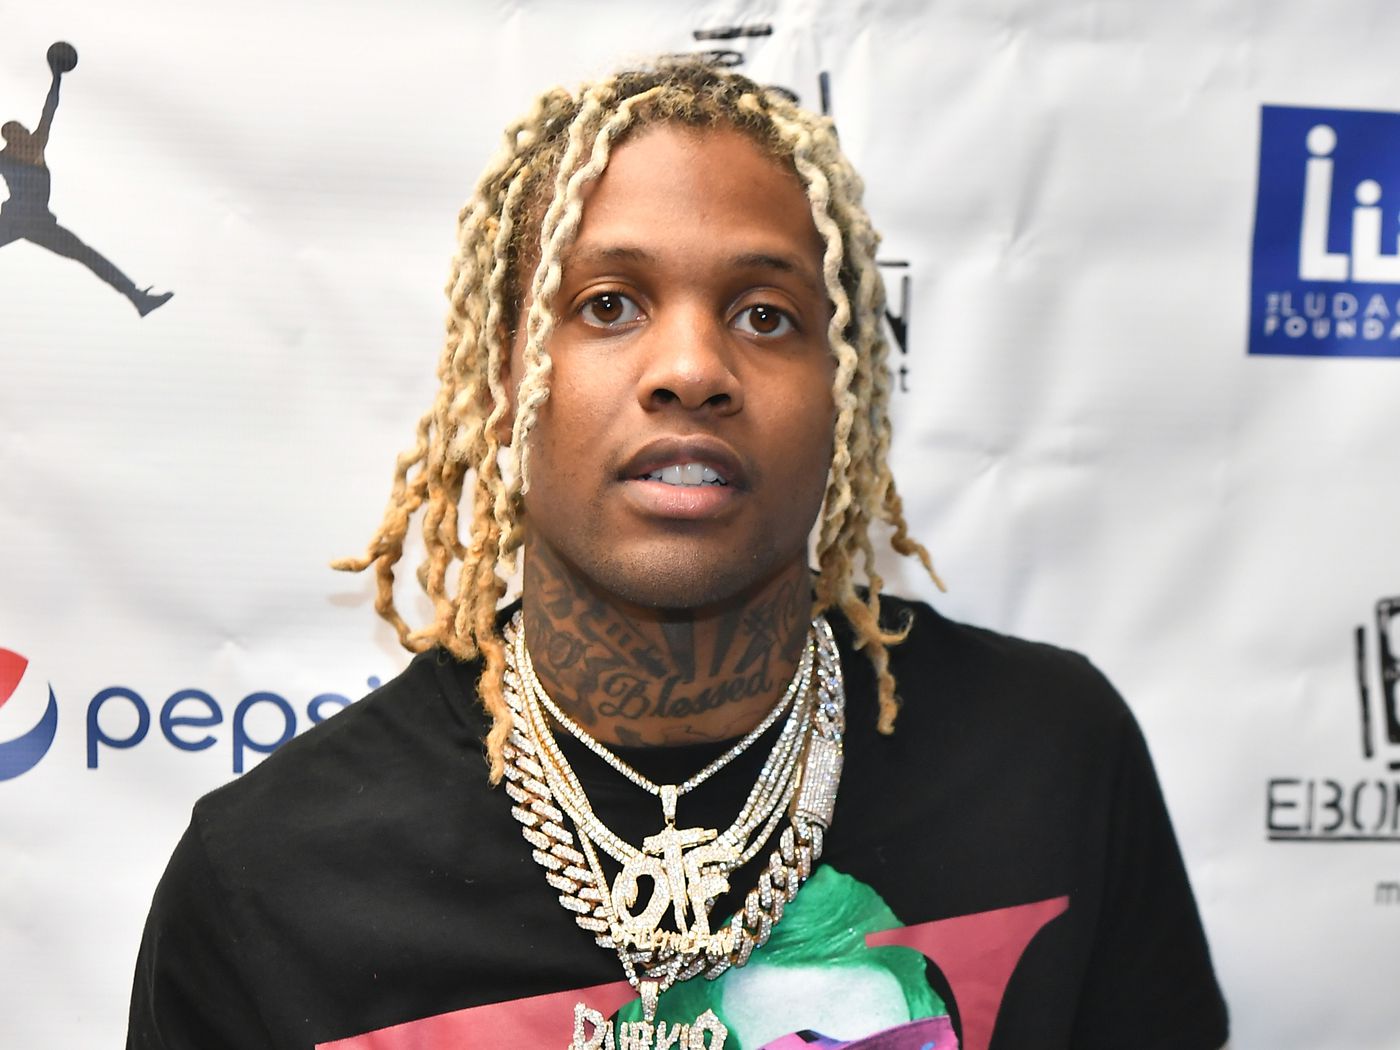 Lil Durk Bounces Back as Most Featured Rapper So Far